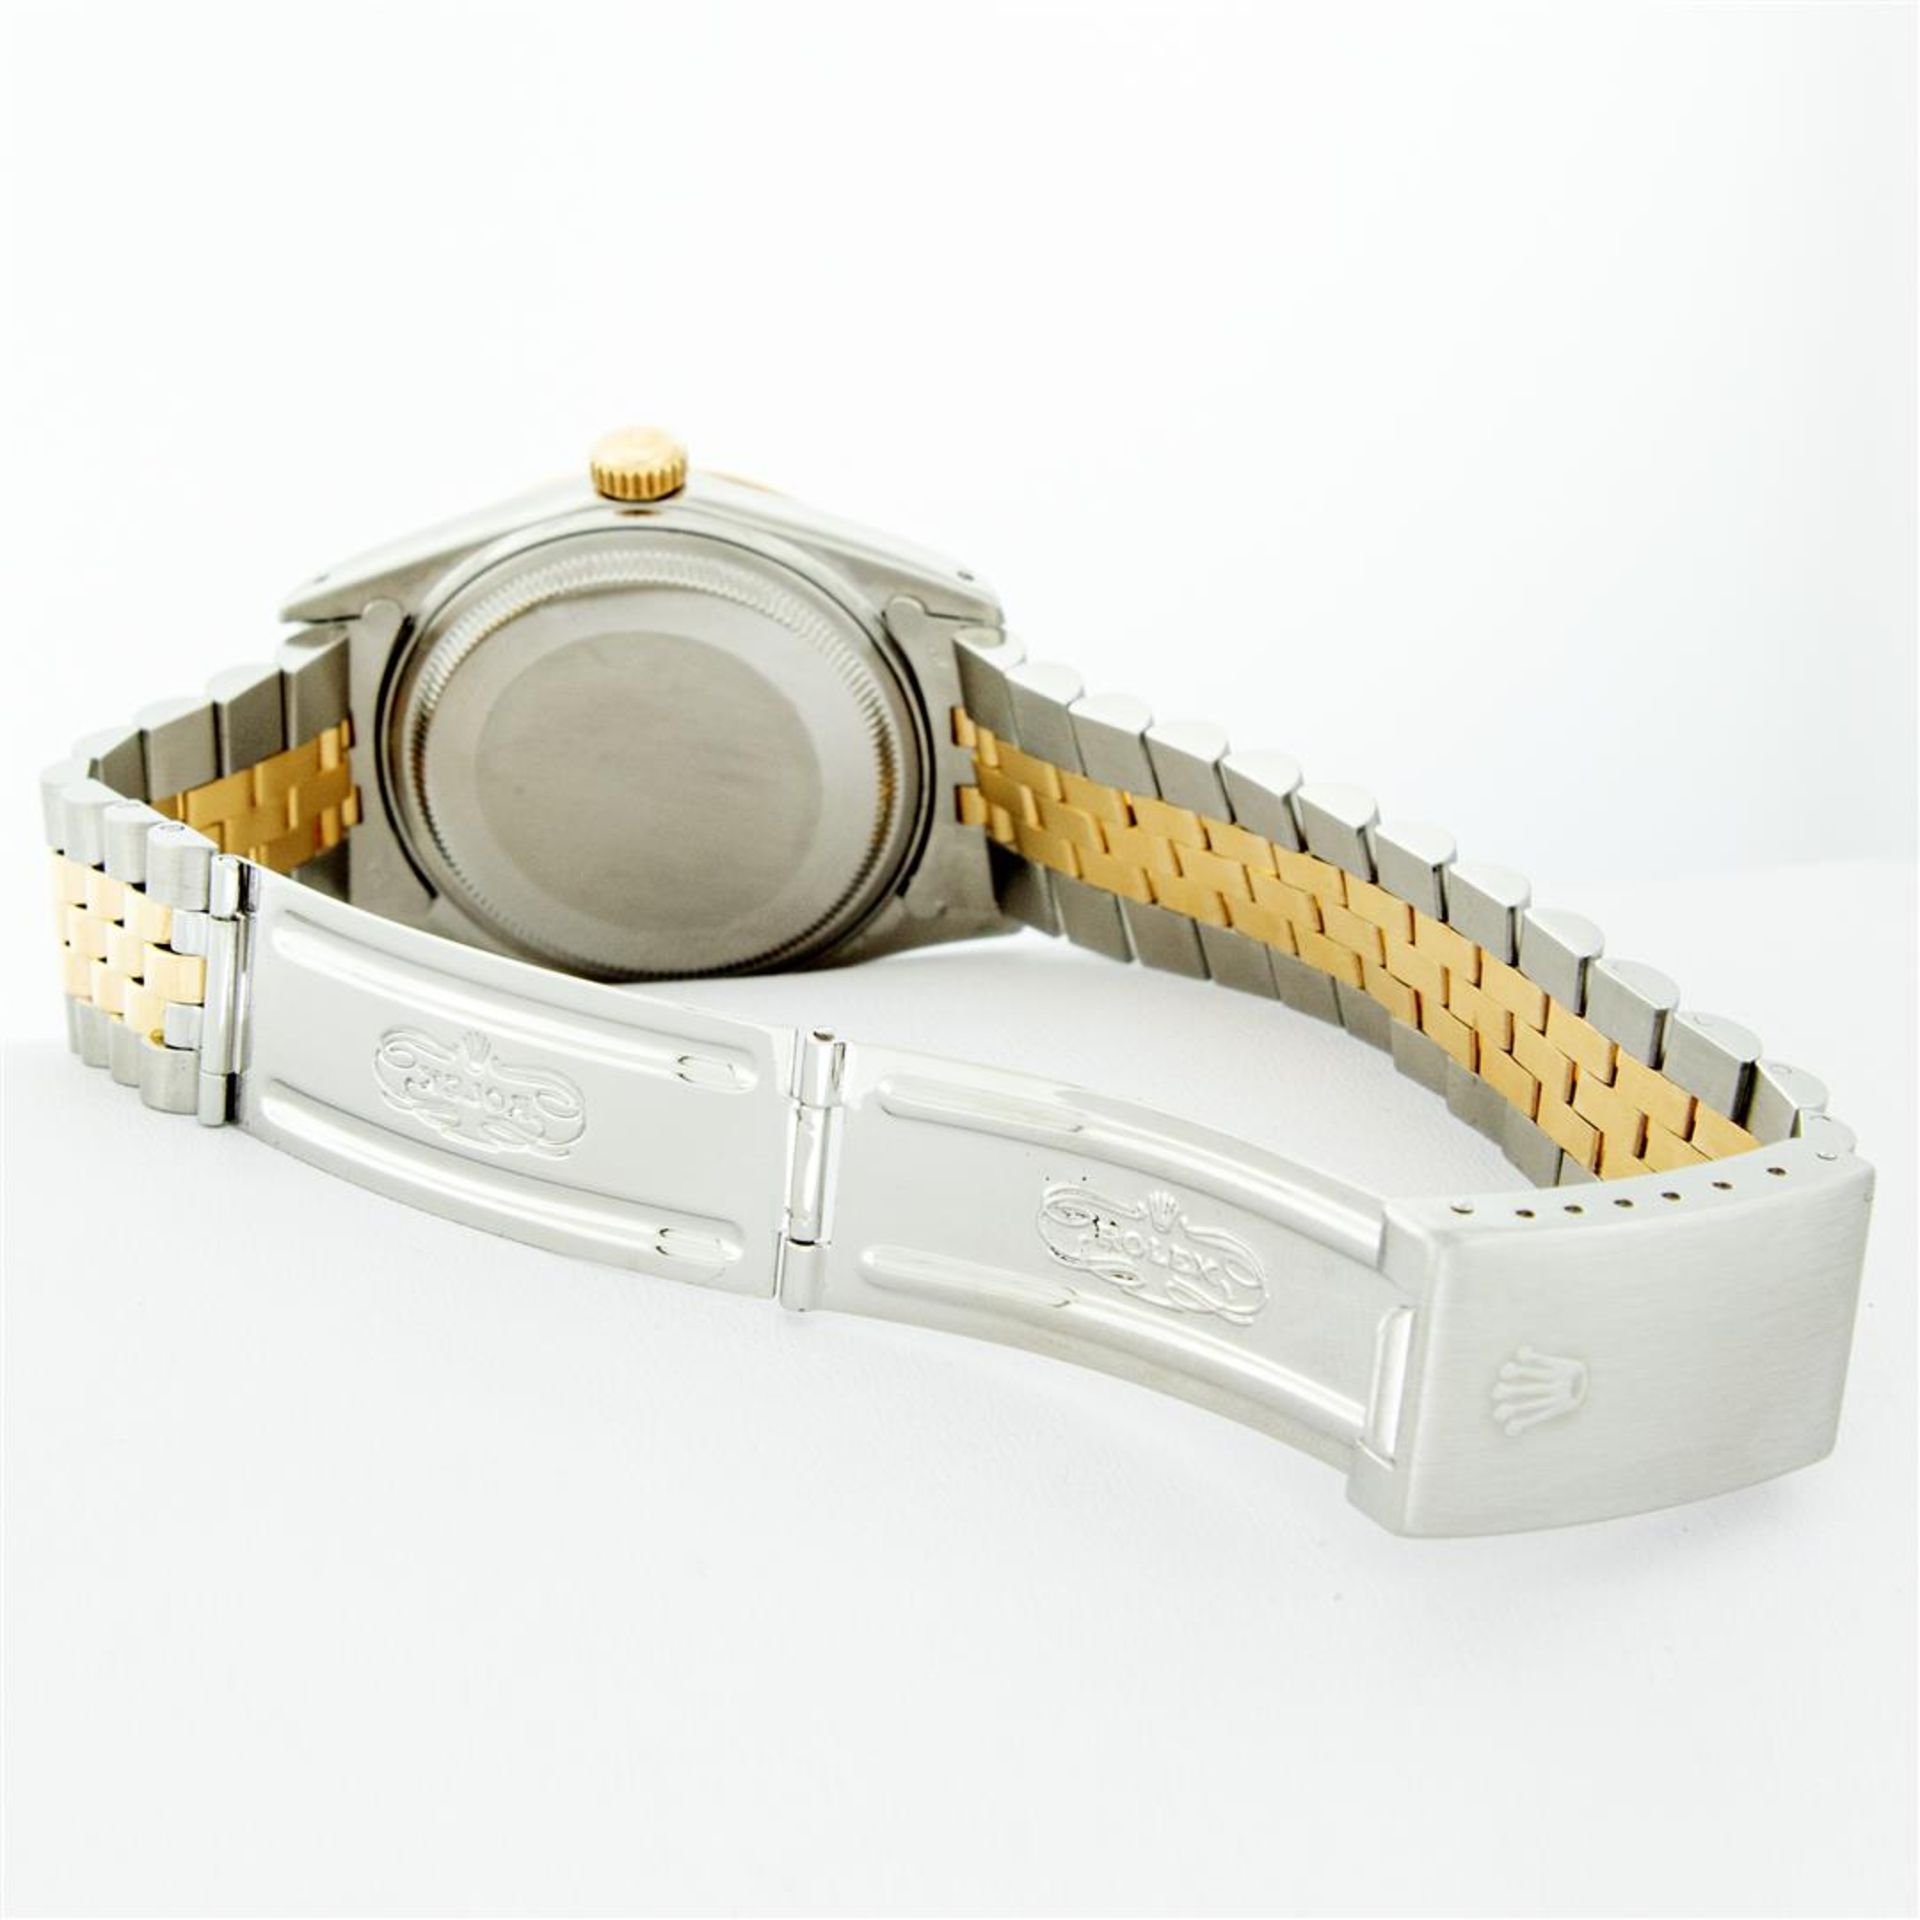 Rolex Mens 2 Tone Mother Of Pearl VS Diamond 36MM Datejust Wristwatch - Image 8 of 9